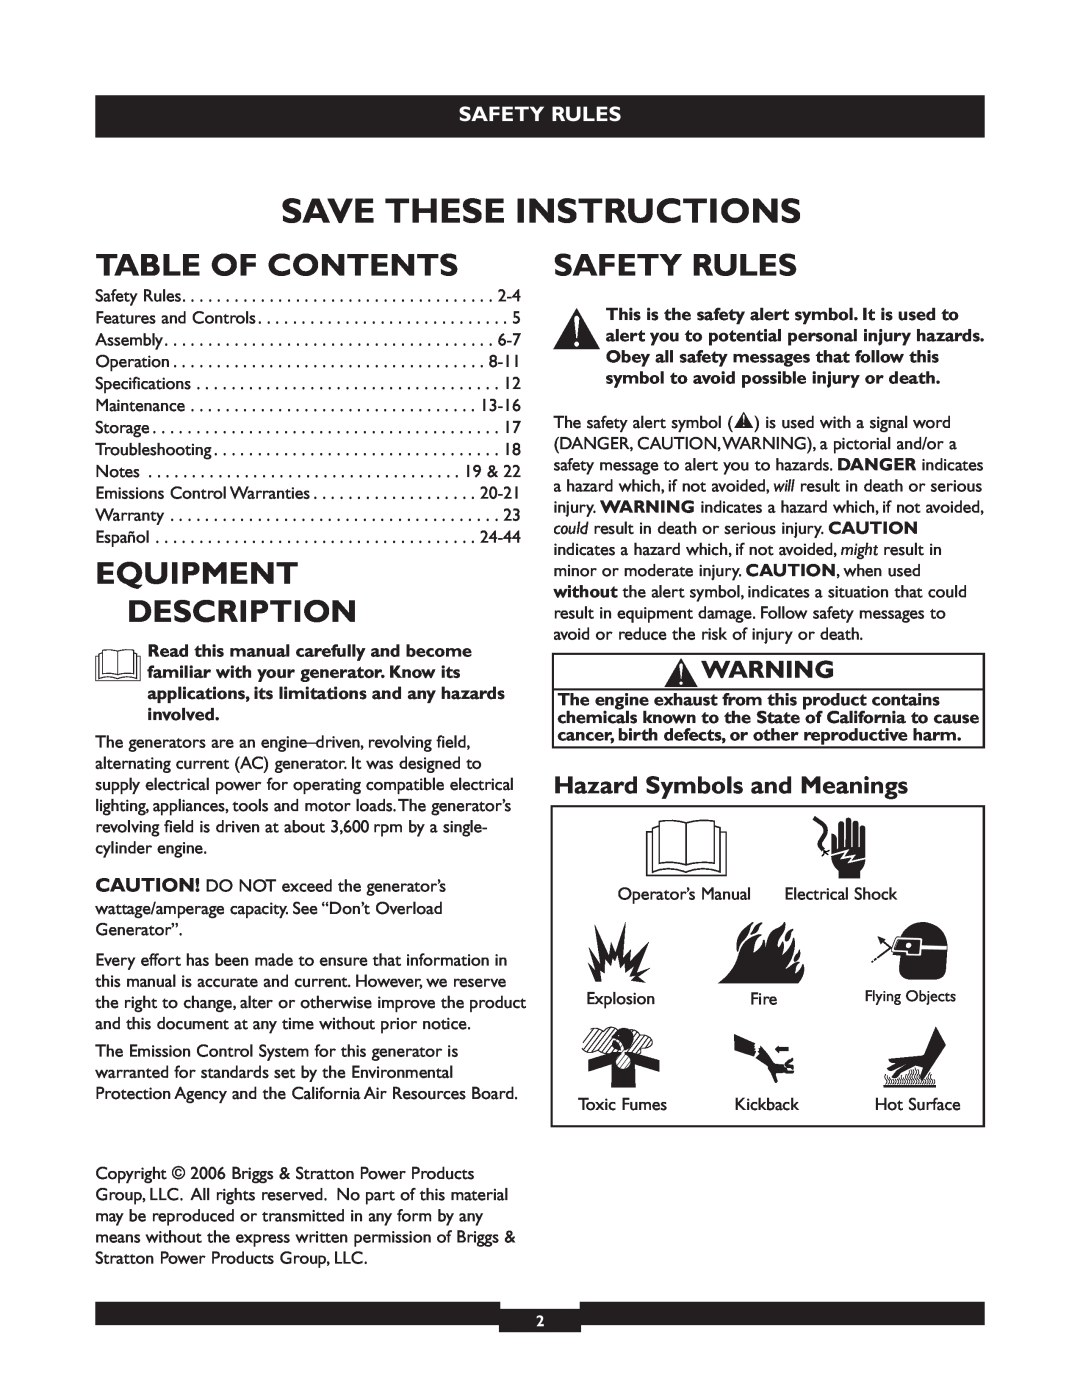 Briggs & Stratton 30219 manual Table Of Contents, Equipment Description, Safety Rules, Hazard Symbols and Meanings 